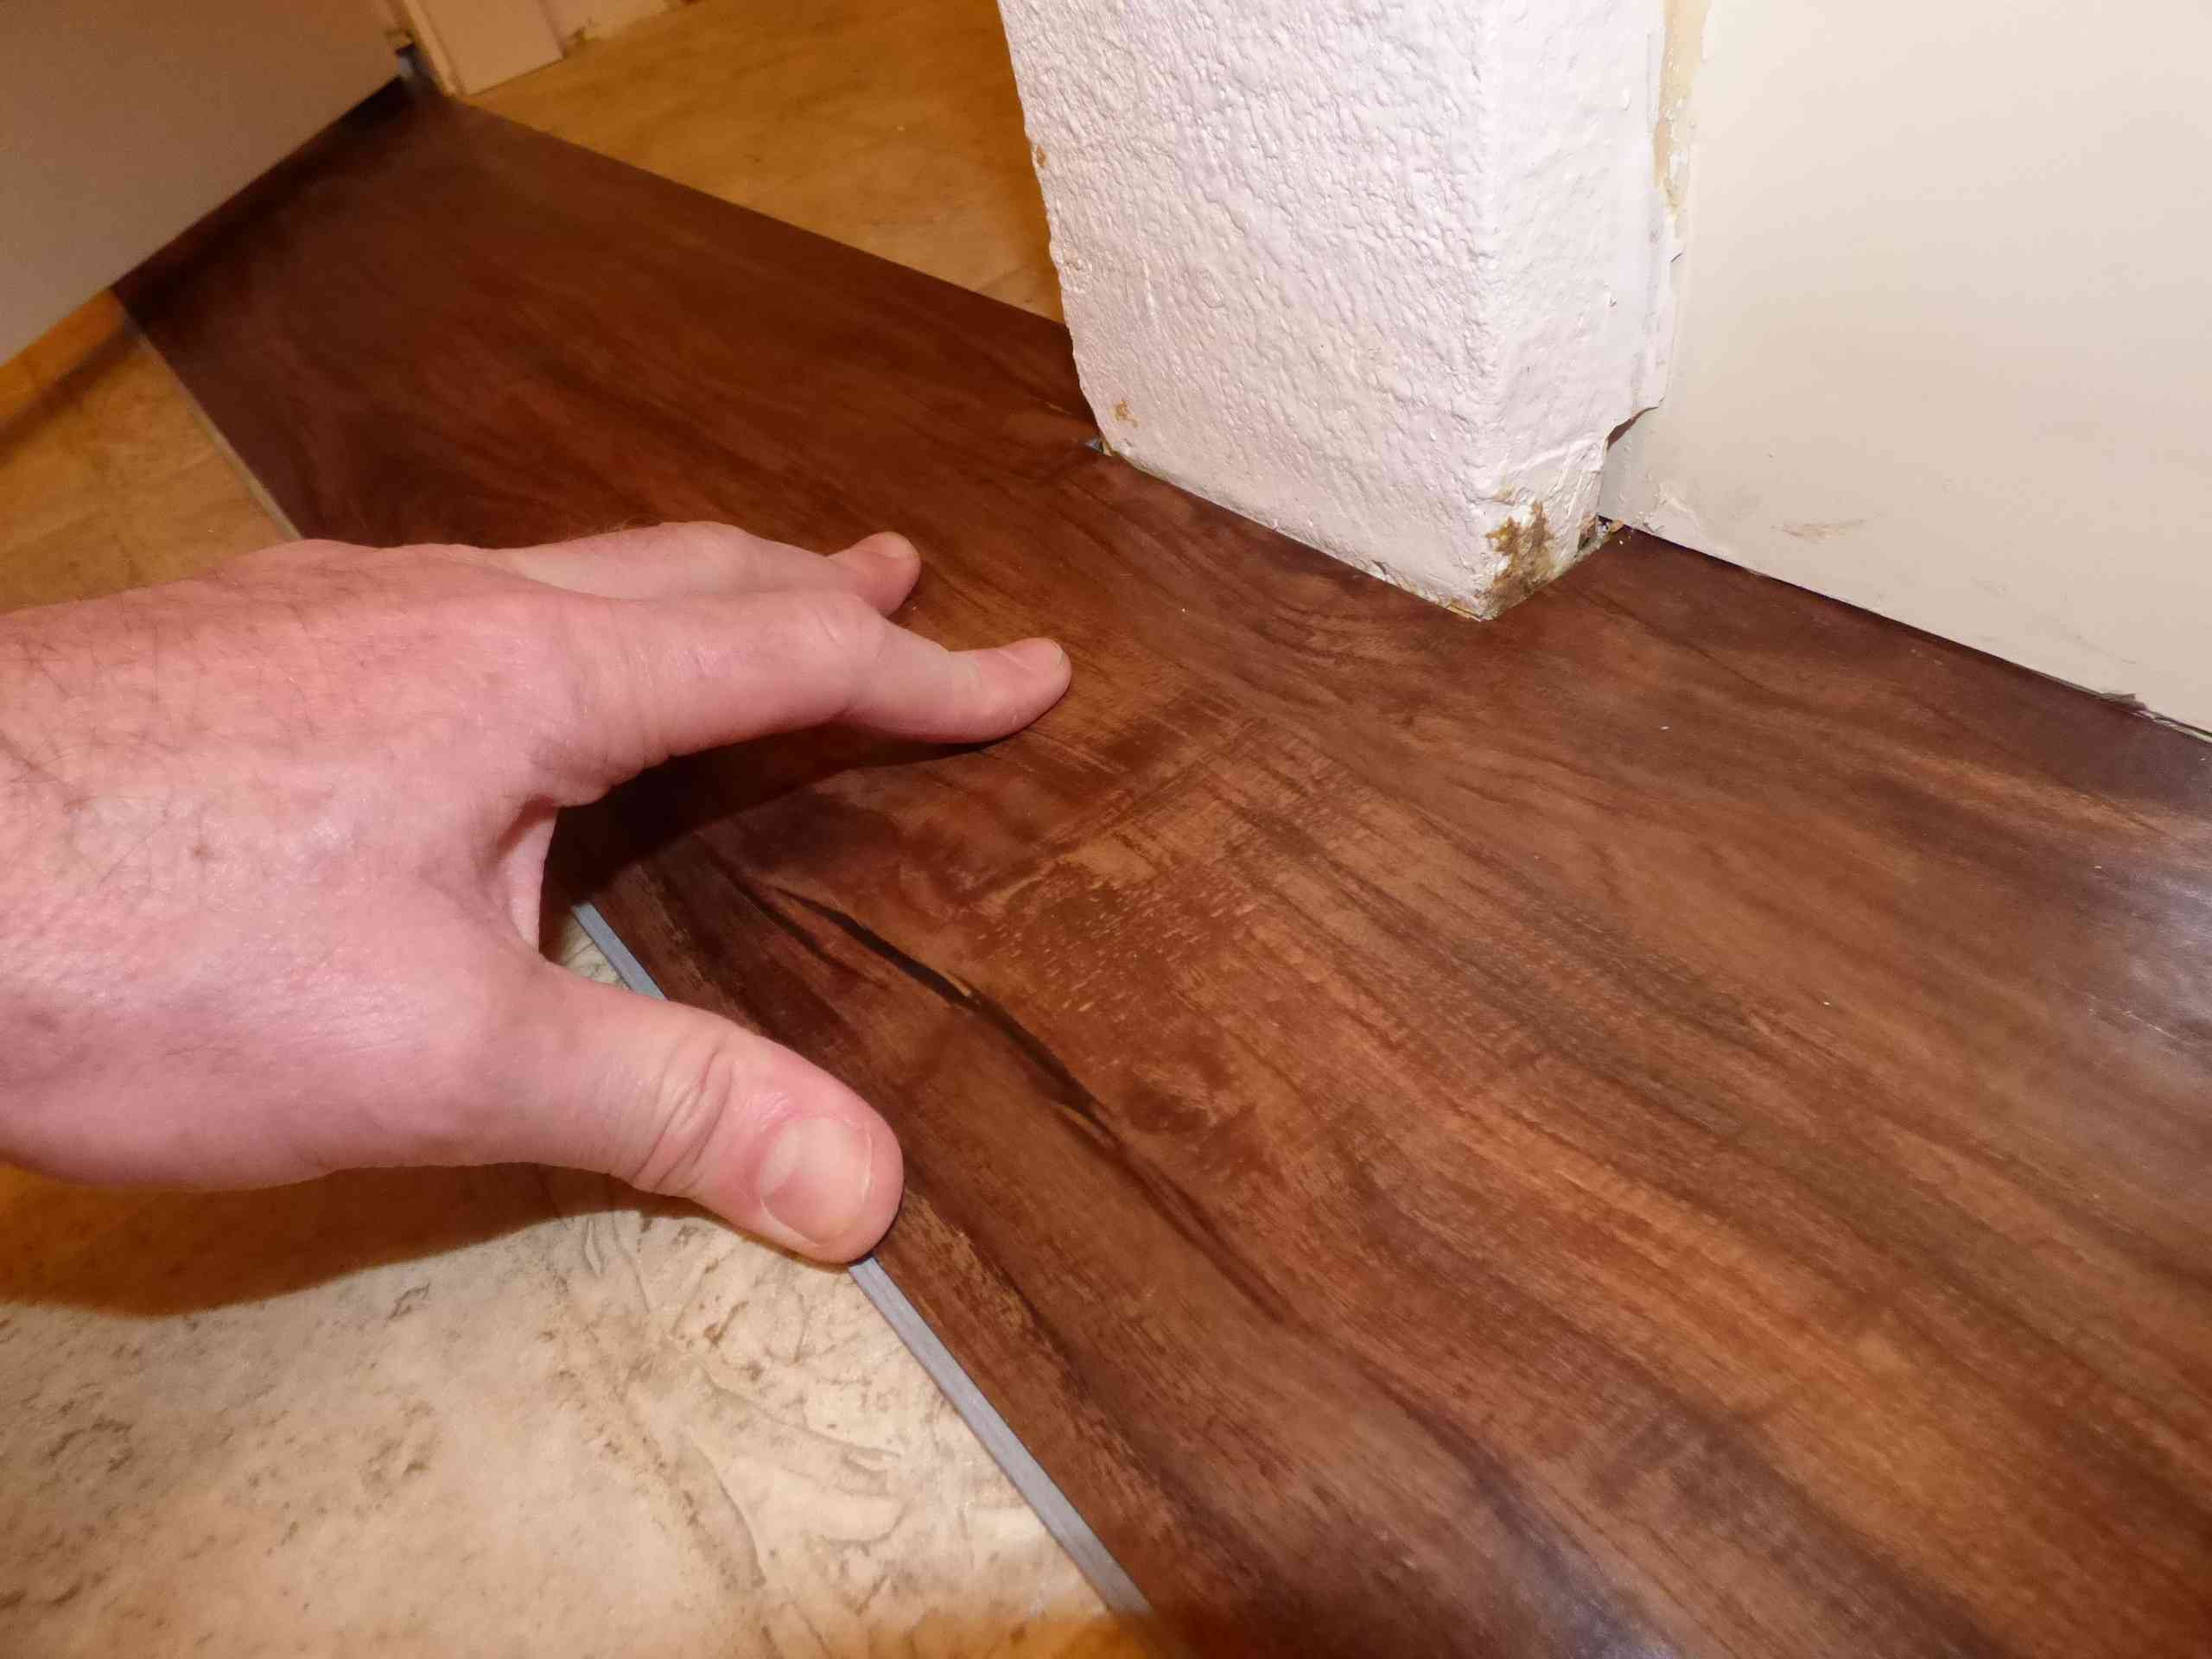 how much to put hardwood floors in 1200 sq ft of its easy and fast to install plank vinyl flooring regarding fitting plank around protrusions 56a4a04f3df78cf7728350a3 jpg